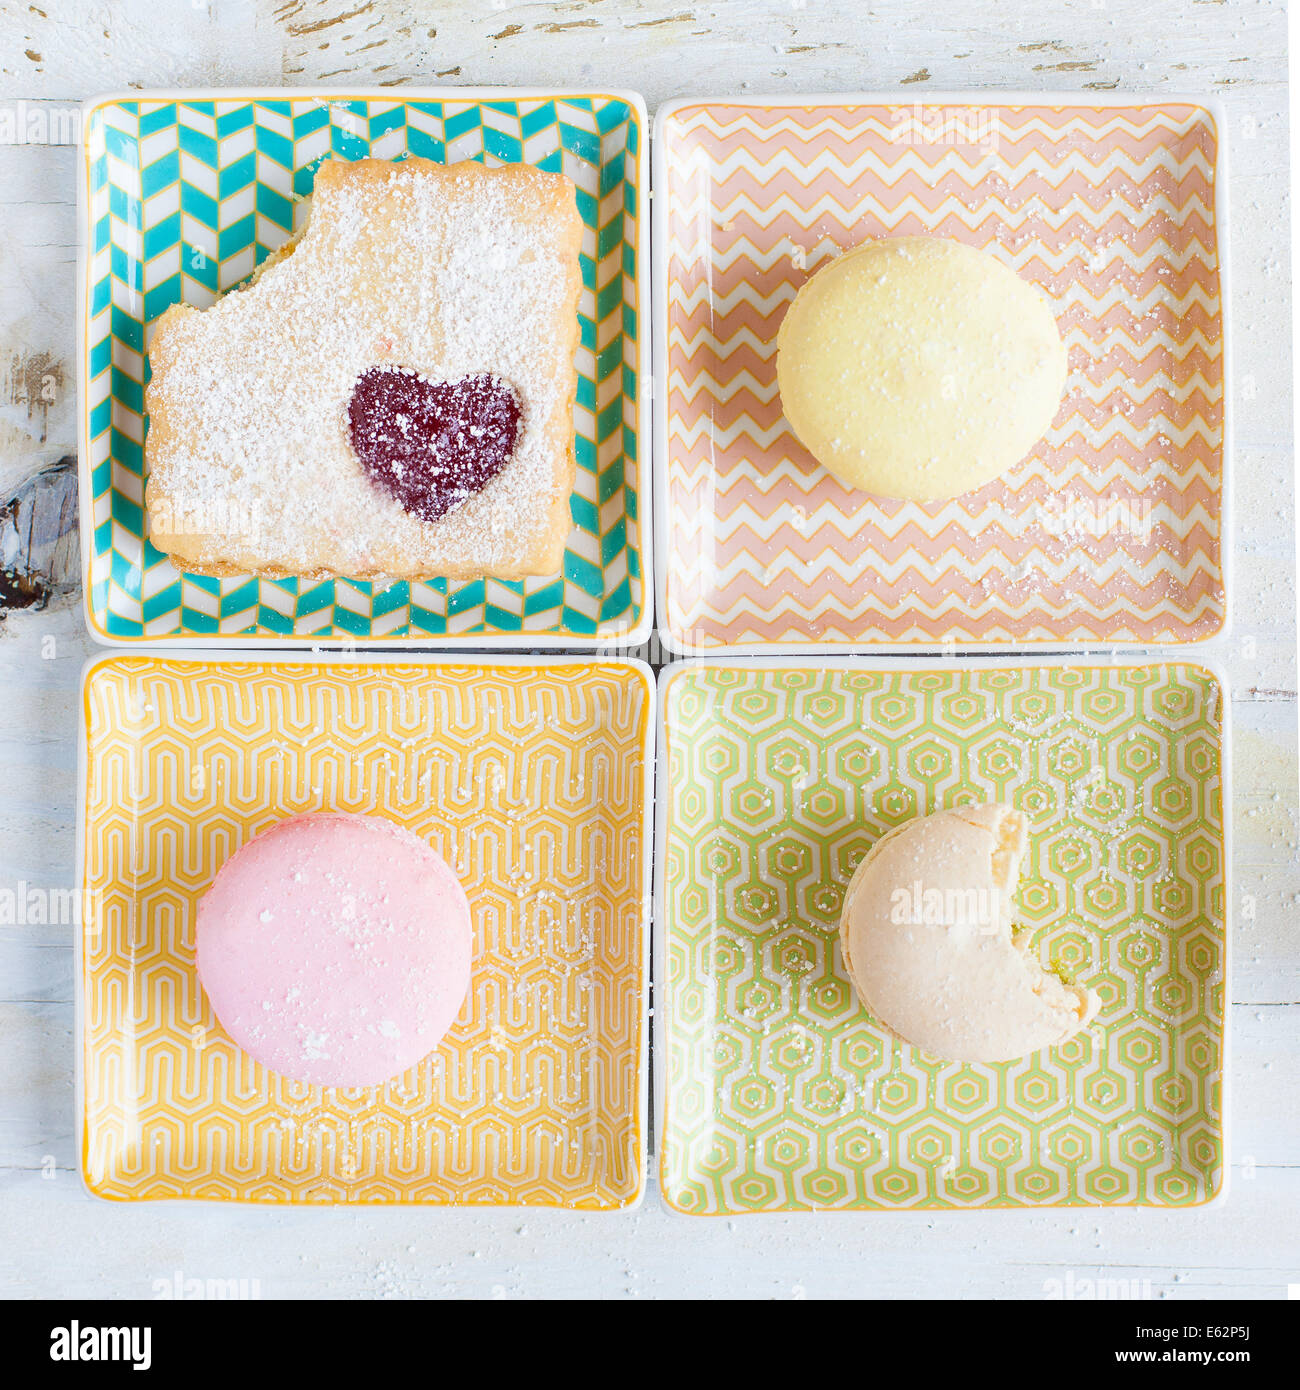 Macarons and cookie on square pastel plates Stock Photo